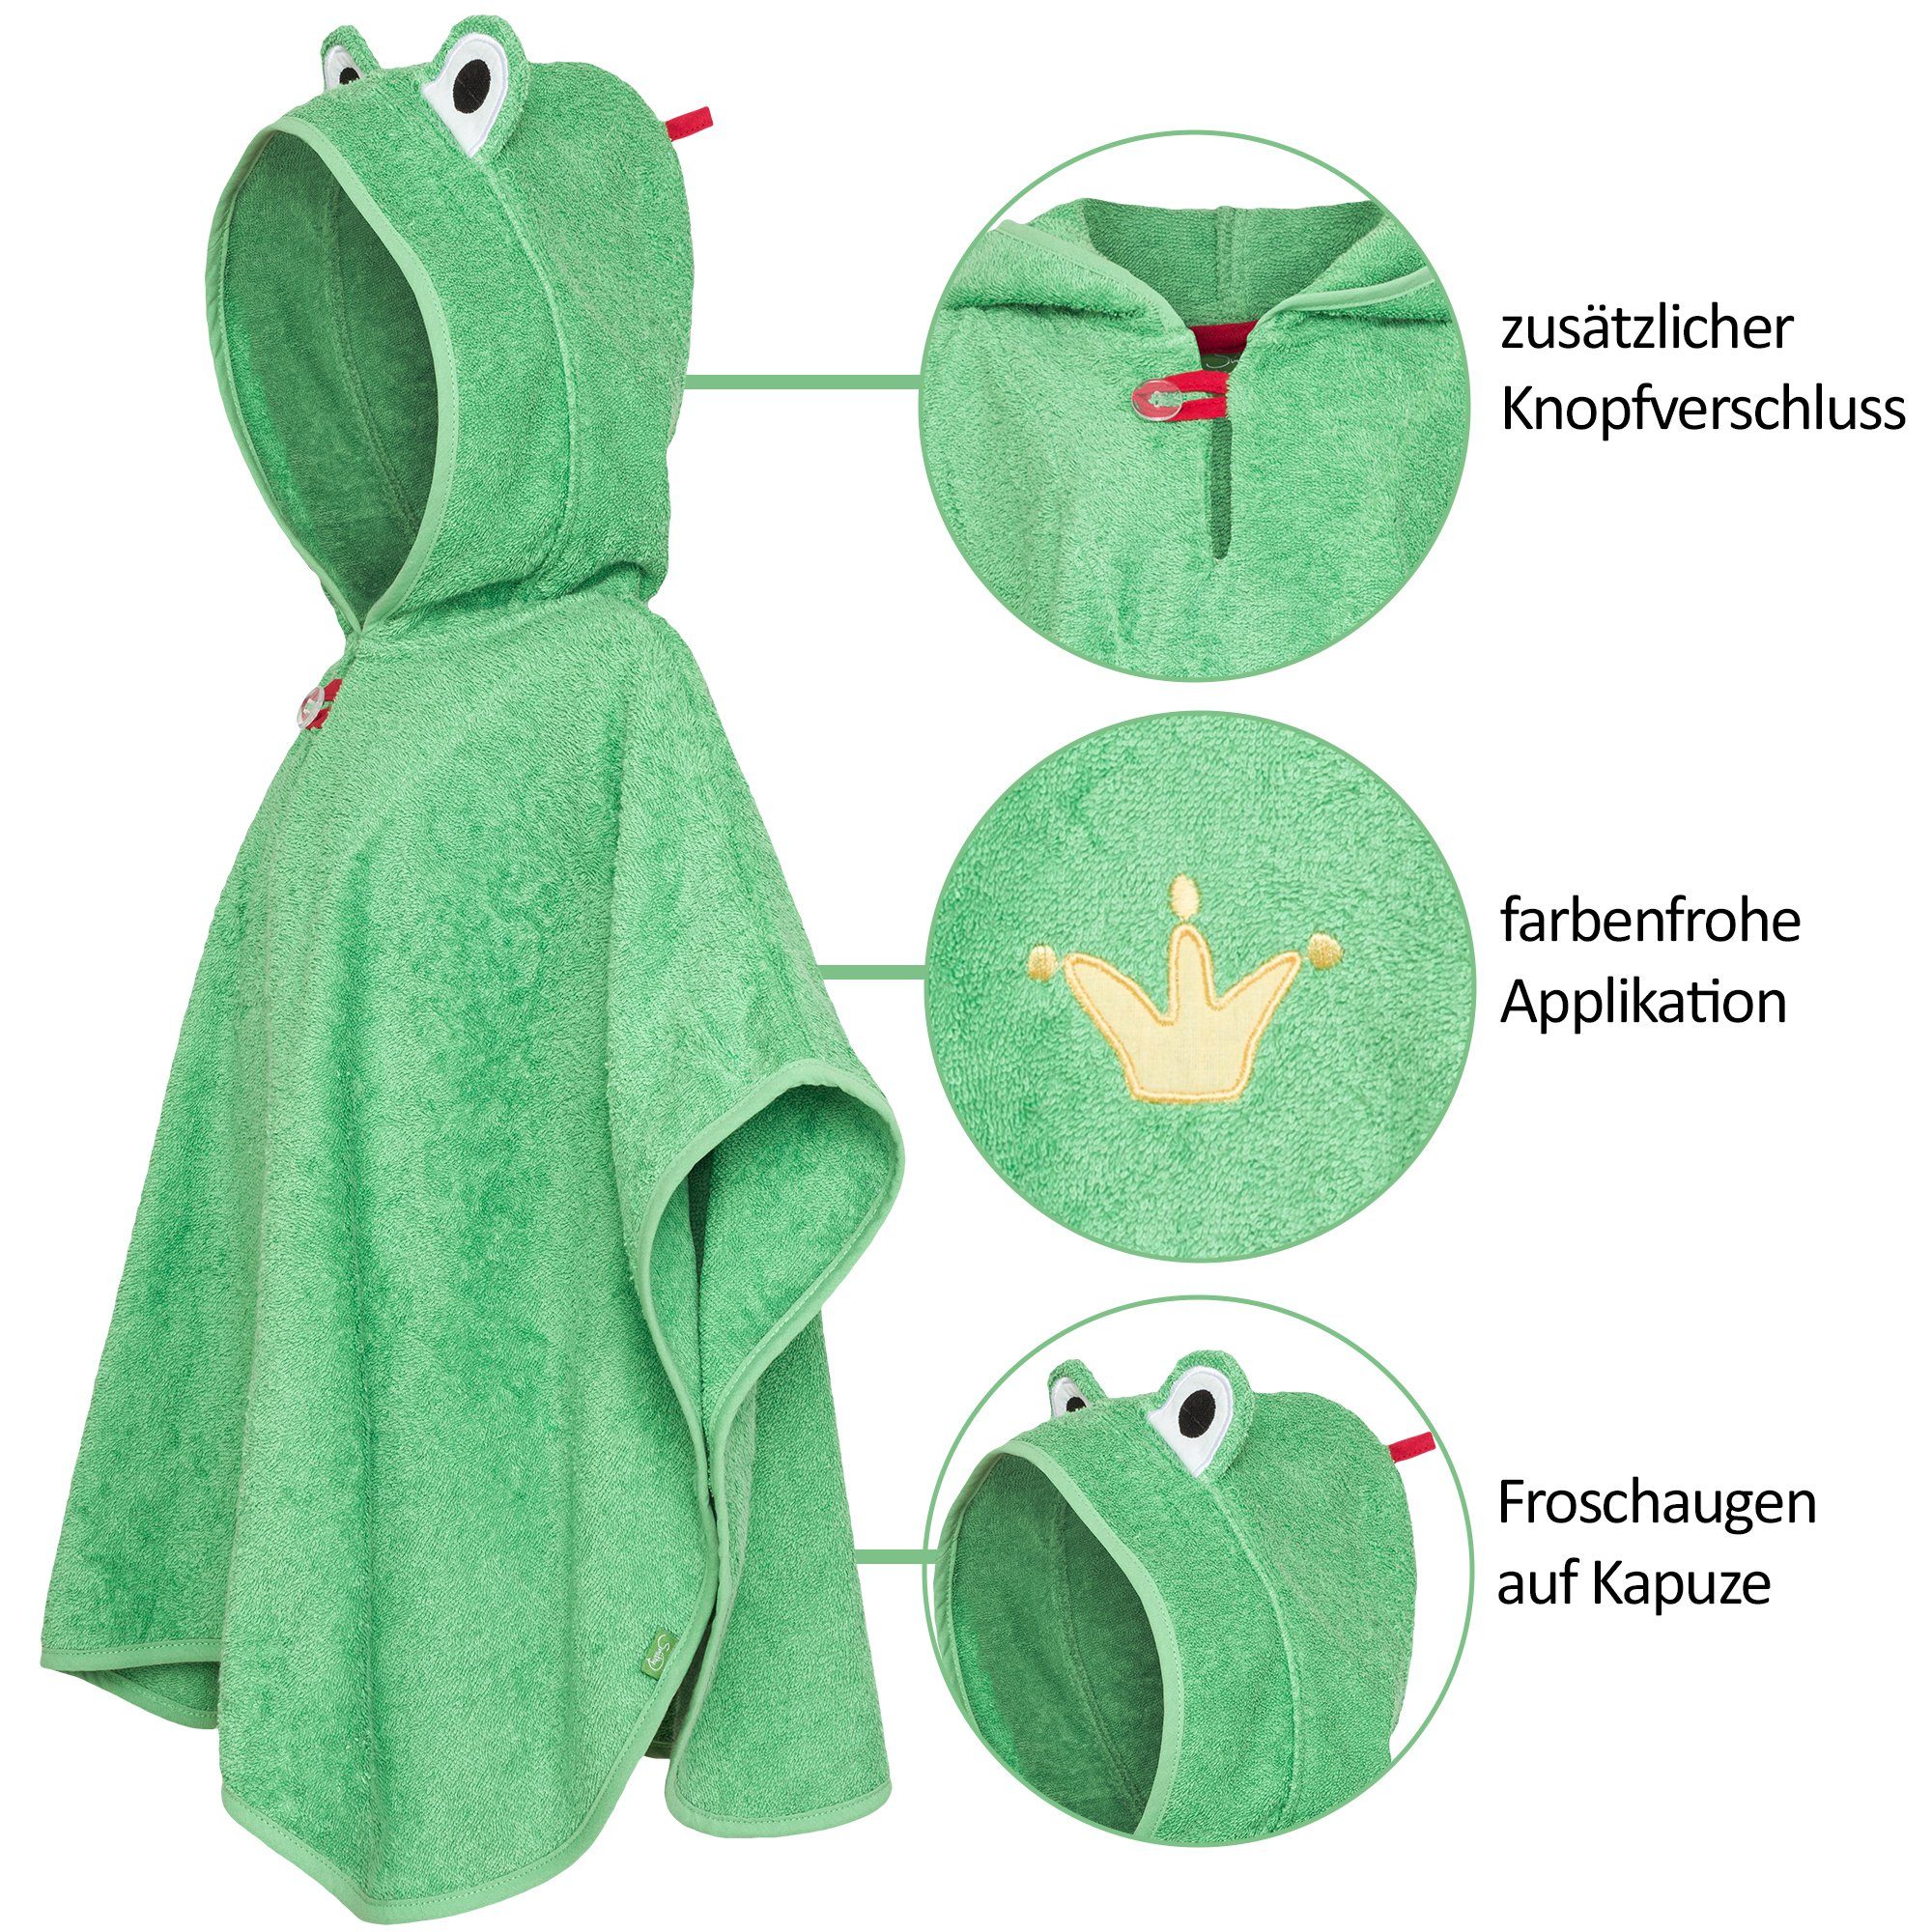 Smithy Badeponcho am Frottee, Europe grün, made Knöpfe in Armloch, Frosch, Baby Frottee